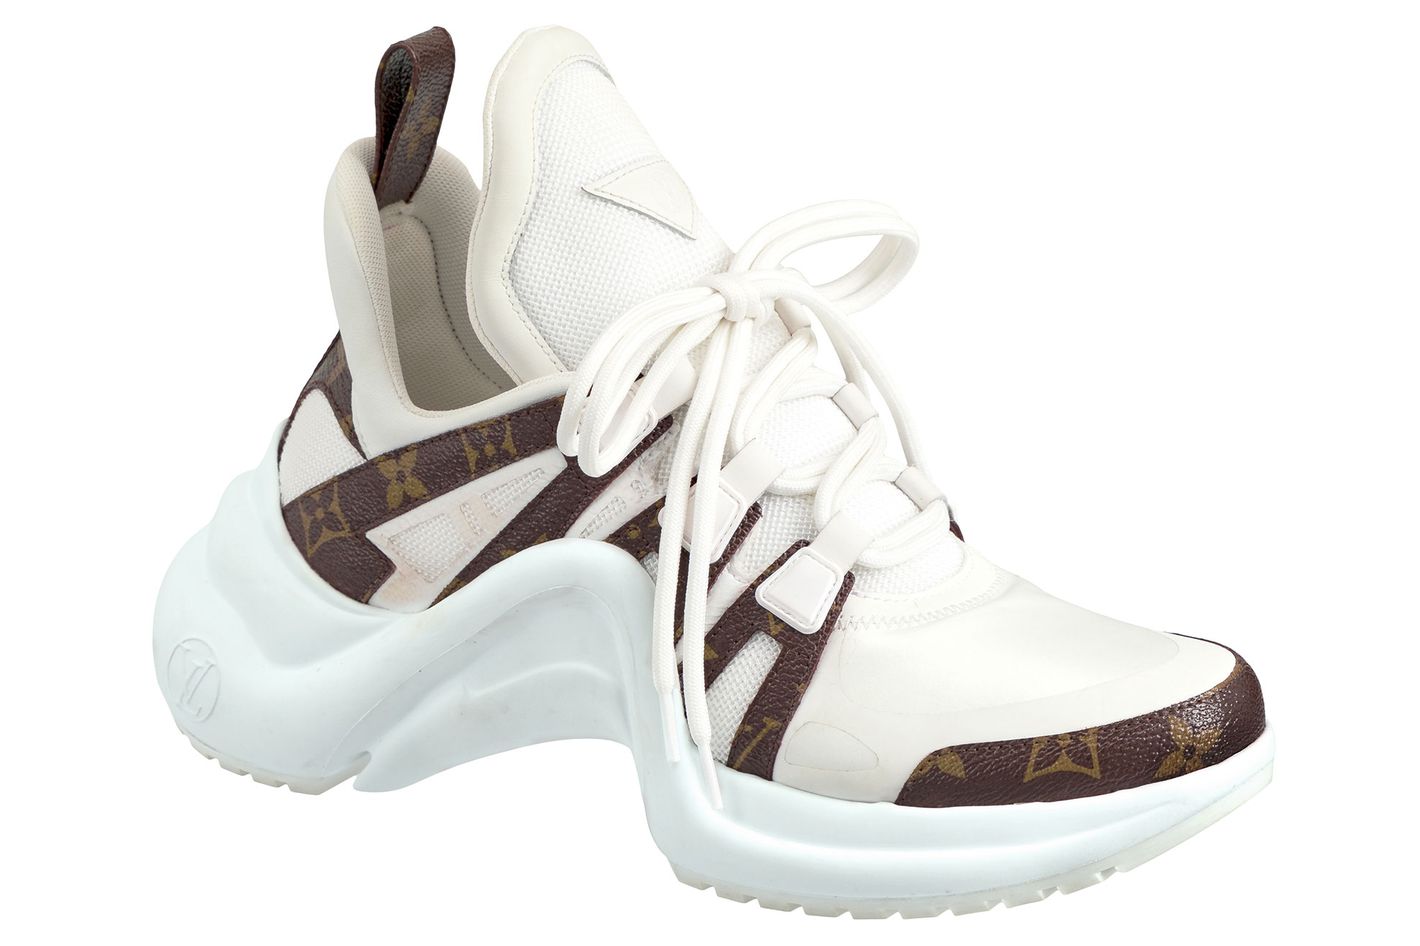 Louis Vuitton Sneaker, Gallery posted by Youngrichco